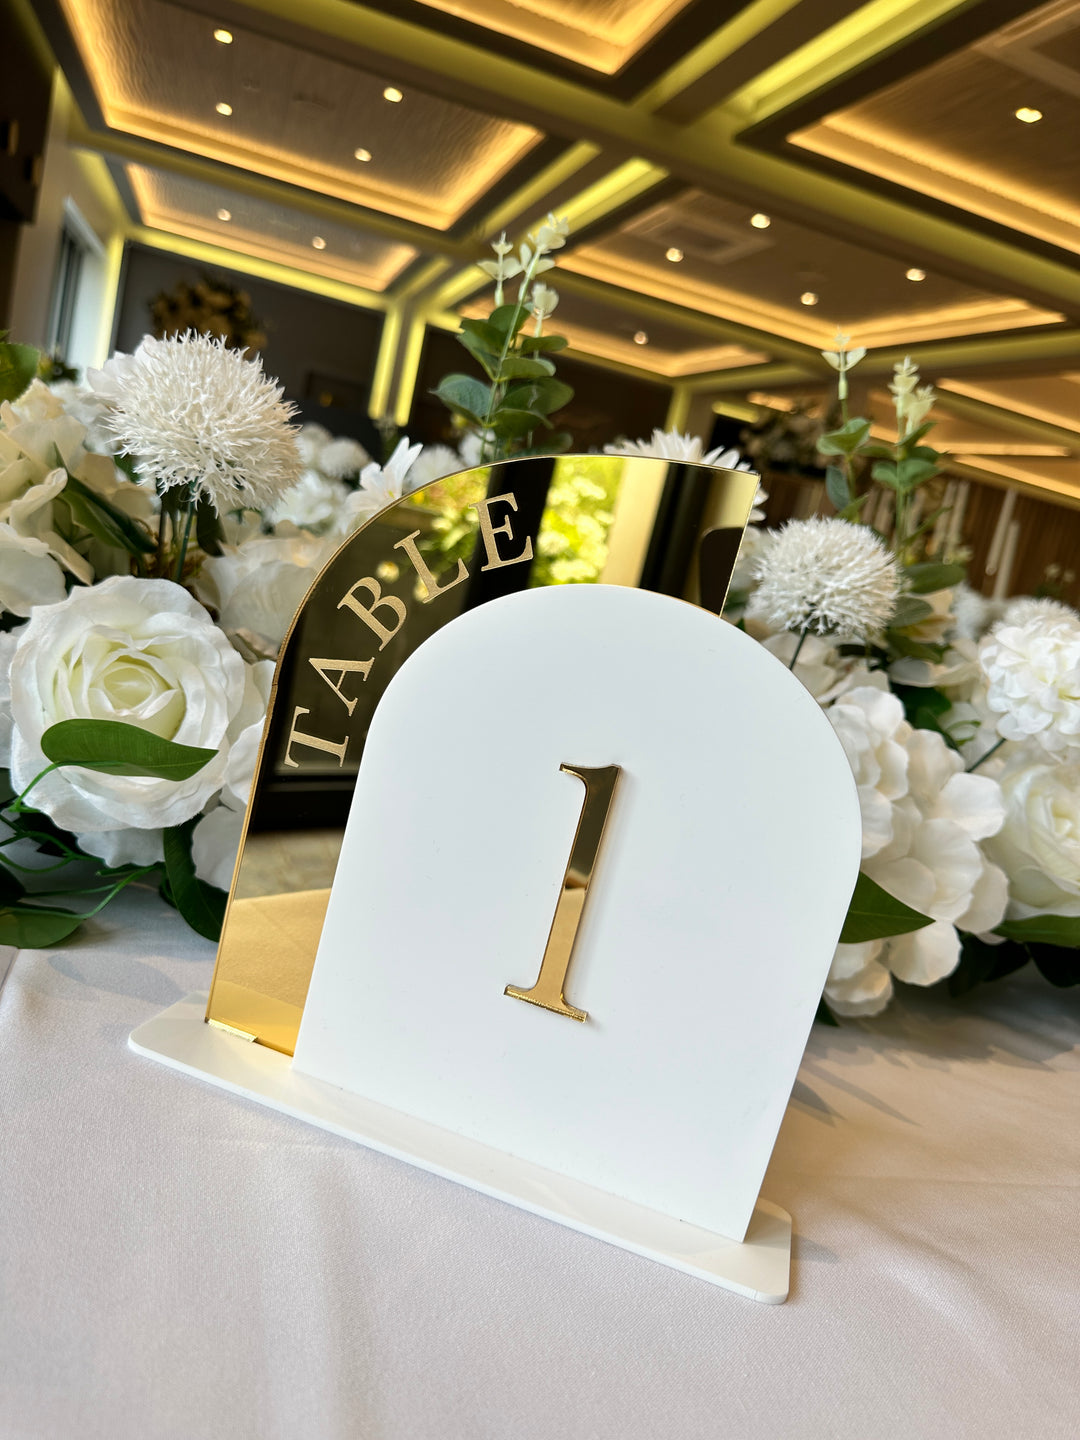 Rental - Table Number - Deluxe Arch - Mirrored Gold & White